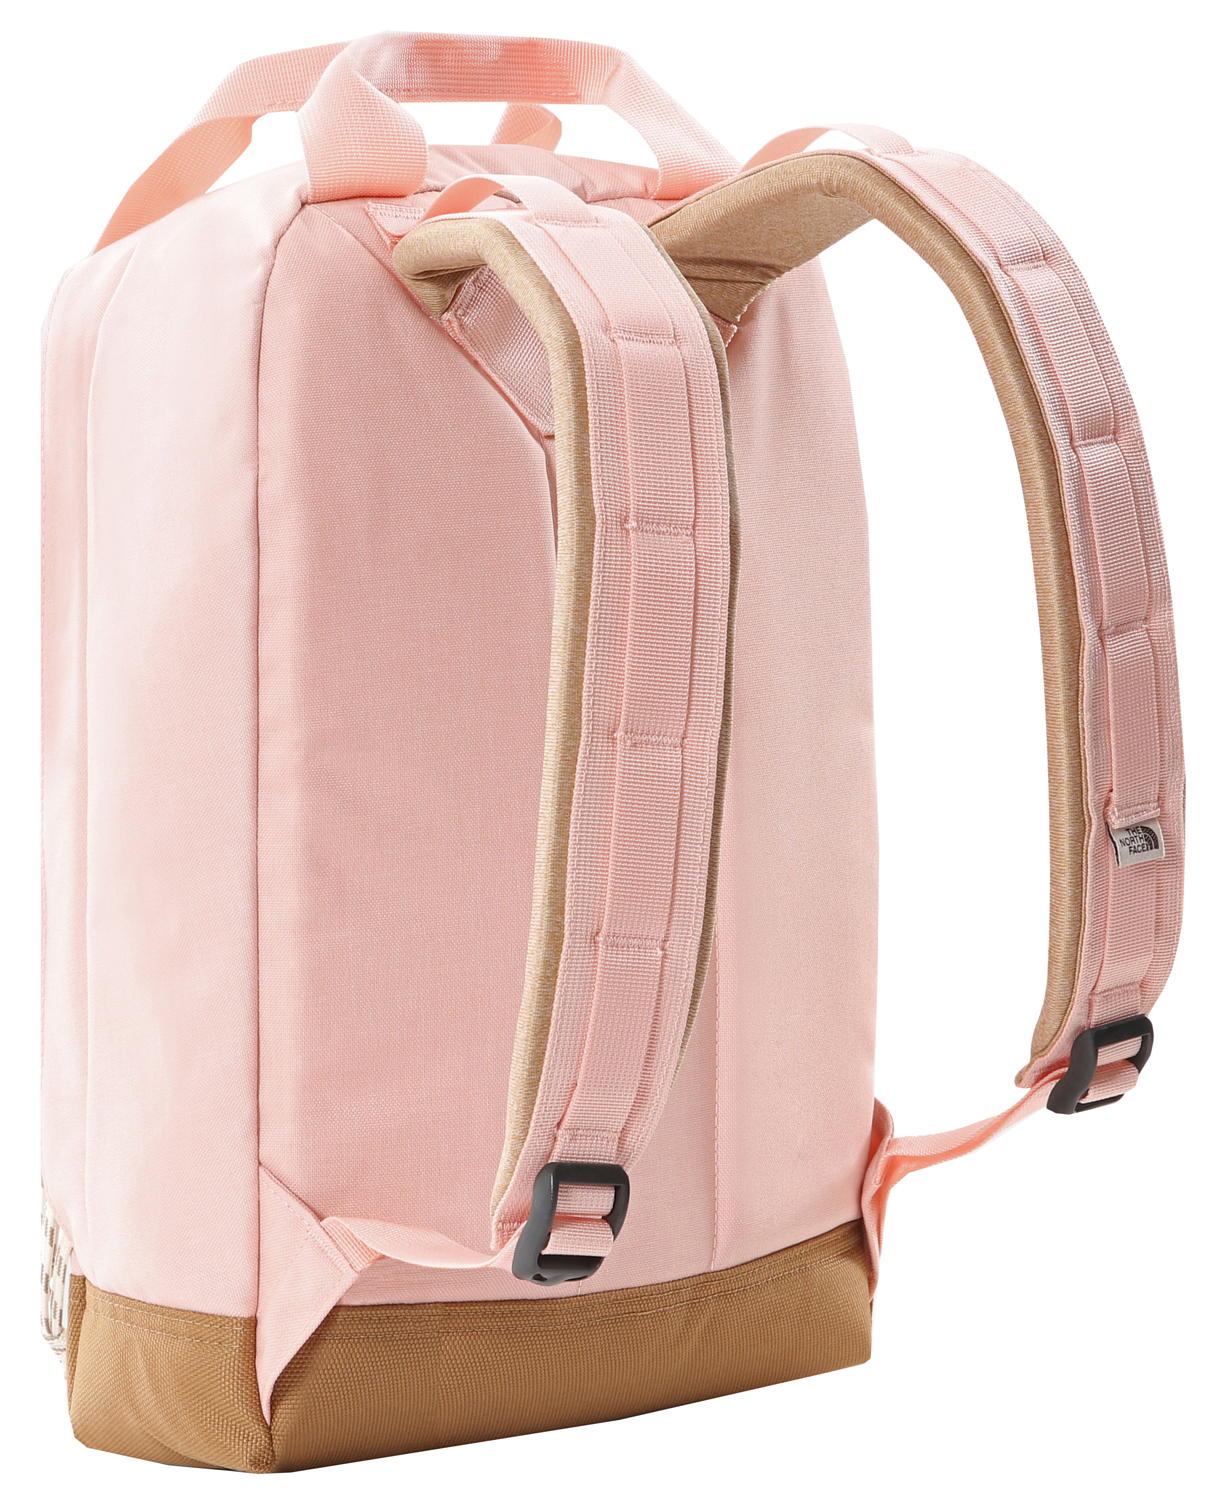 Рюкзак The North Face Tote Pack Evening Sand Pink Dark Heather/Utility Brown/Vintage White